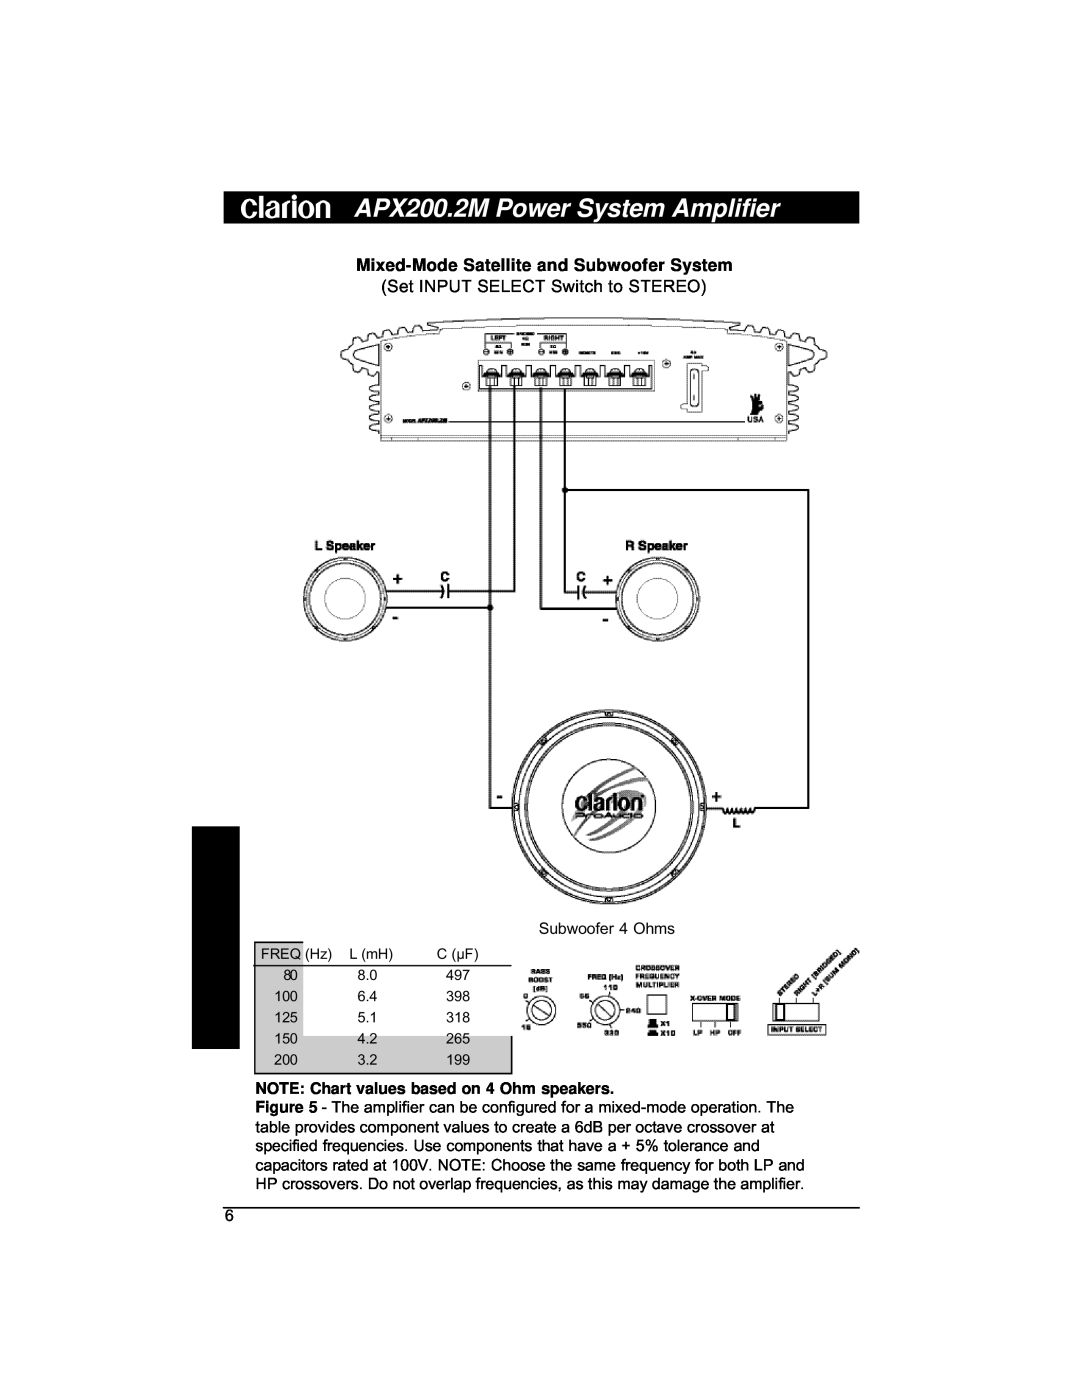 Clarion APX200 installation manual Mixed-ModeSatellite and Subwoofer System, NOTE Chart values based on 4 Ohm speakers 